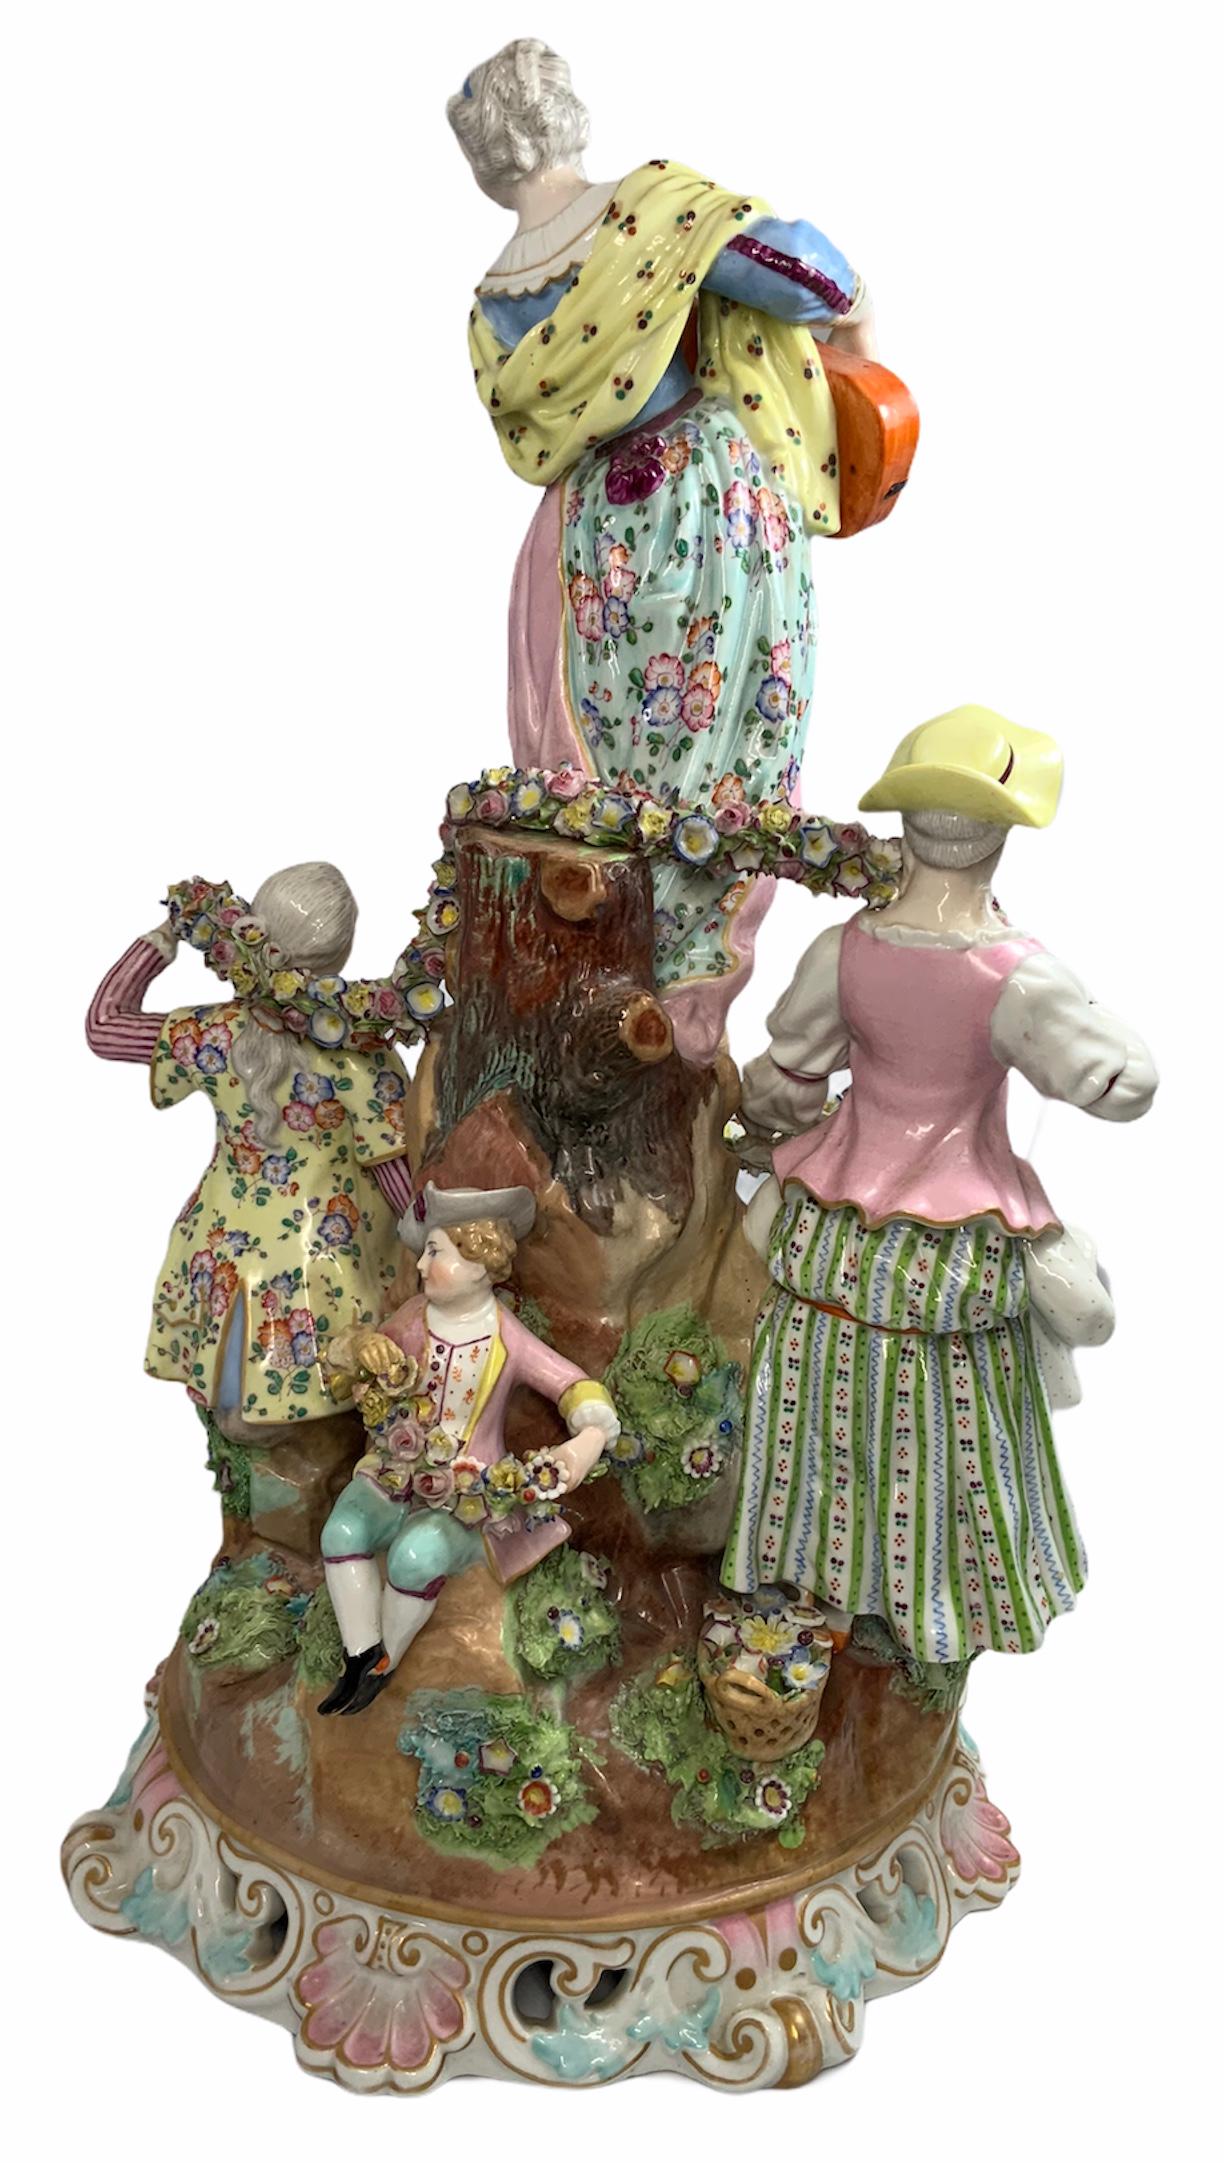 Large Rococo porcelain figure group depicting a scene of peasants, a young woman playing a guitar in the top of a rock accompanied by a young couple and a little girl who are holding a garland of flowers around her. The whole sculpture is painted